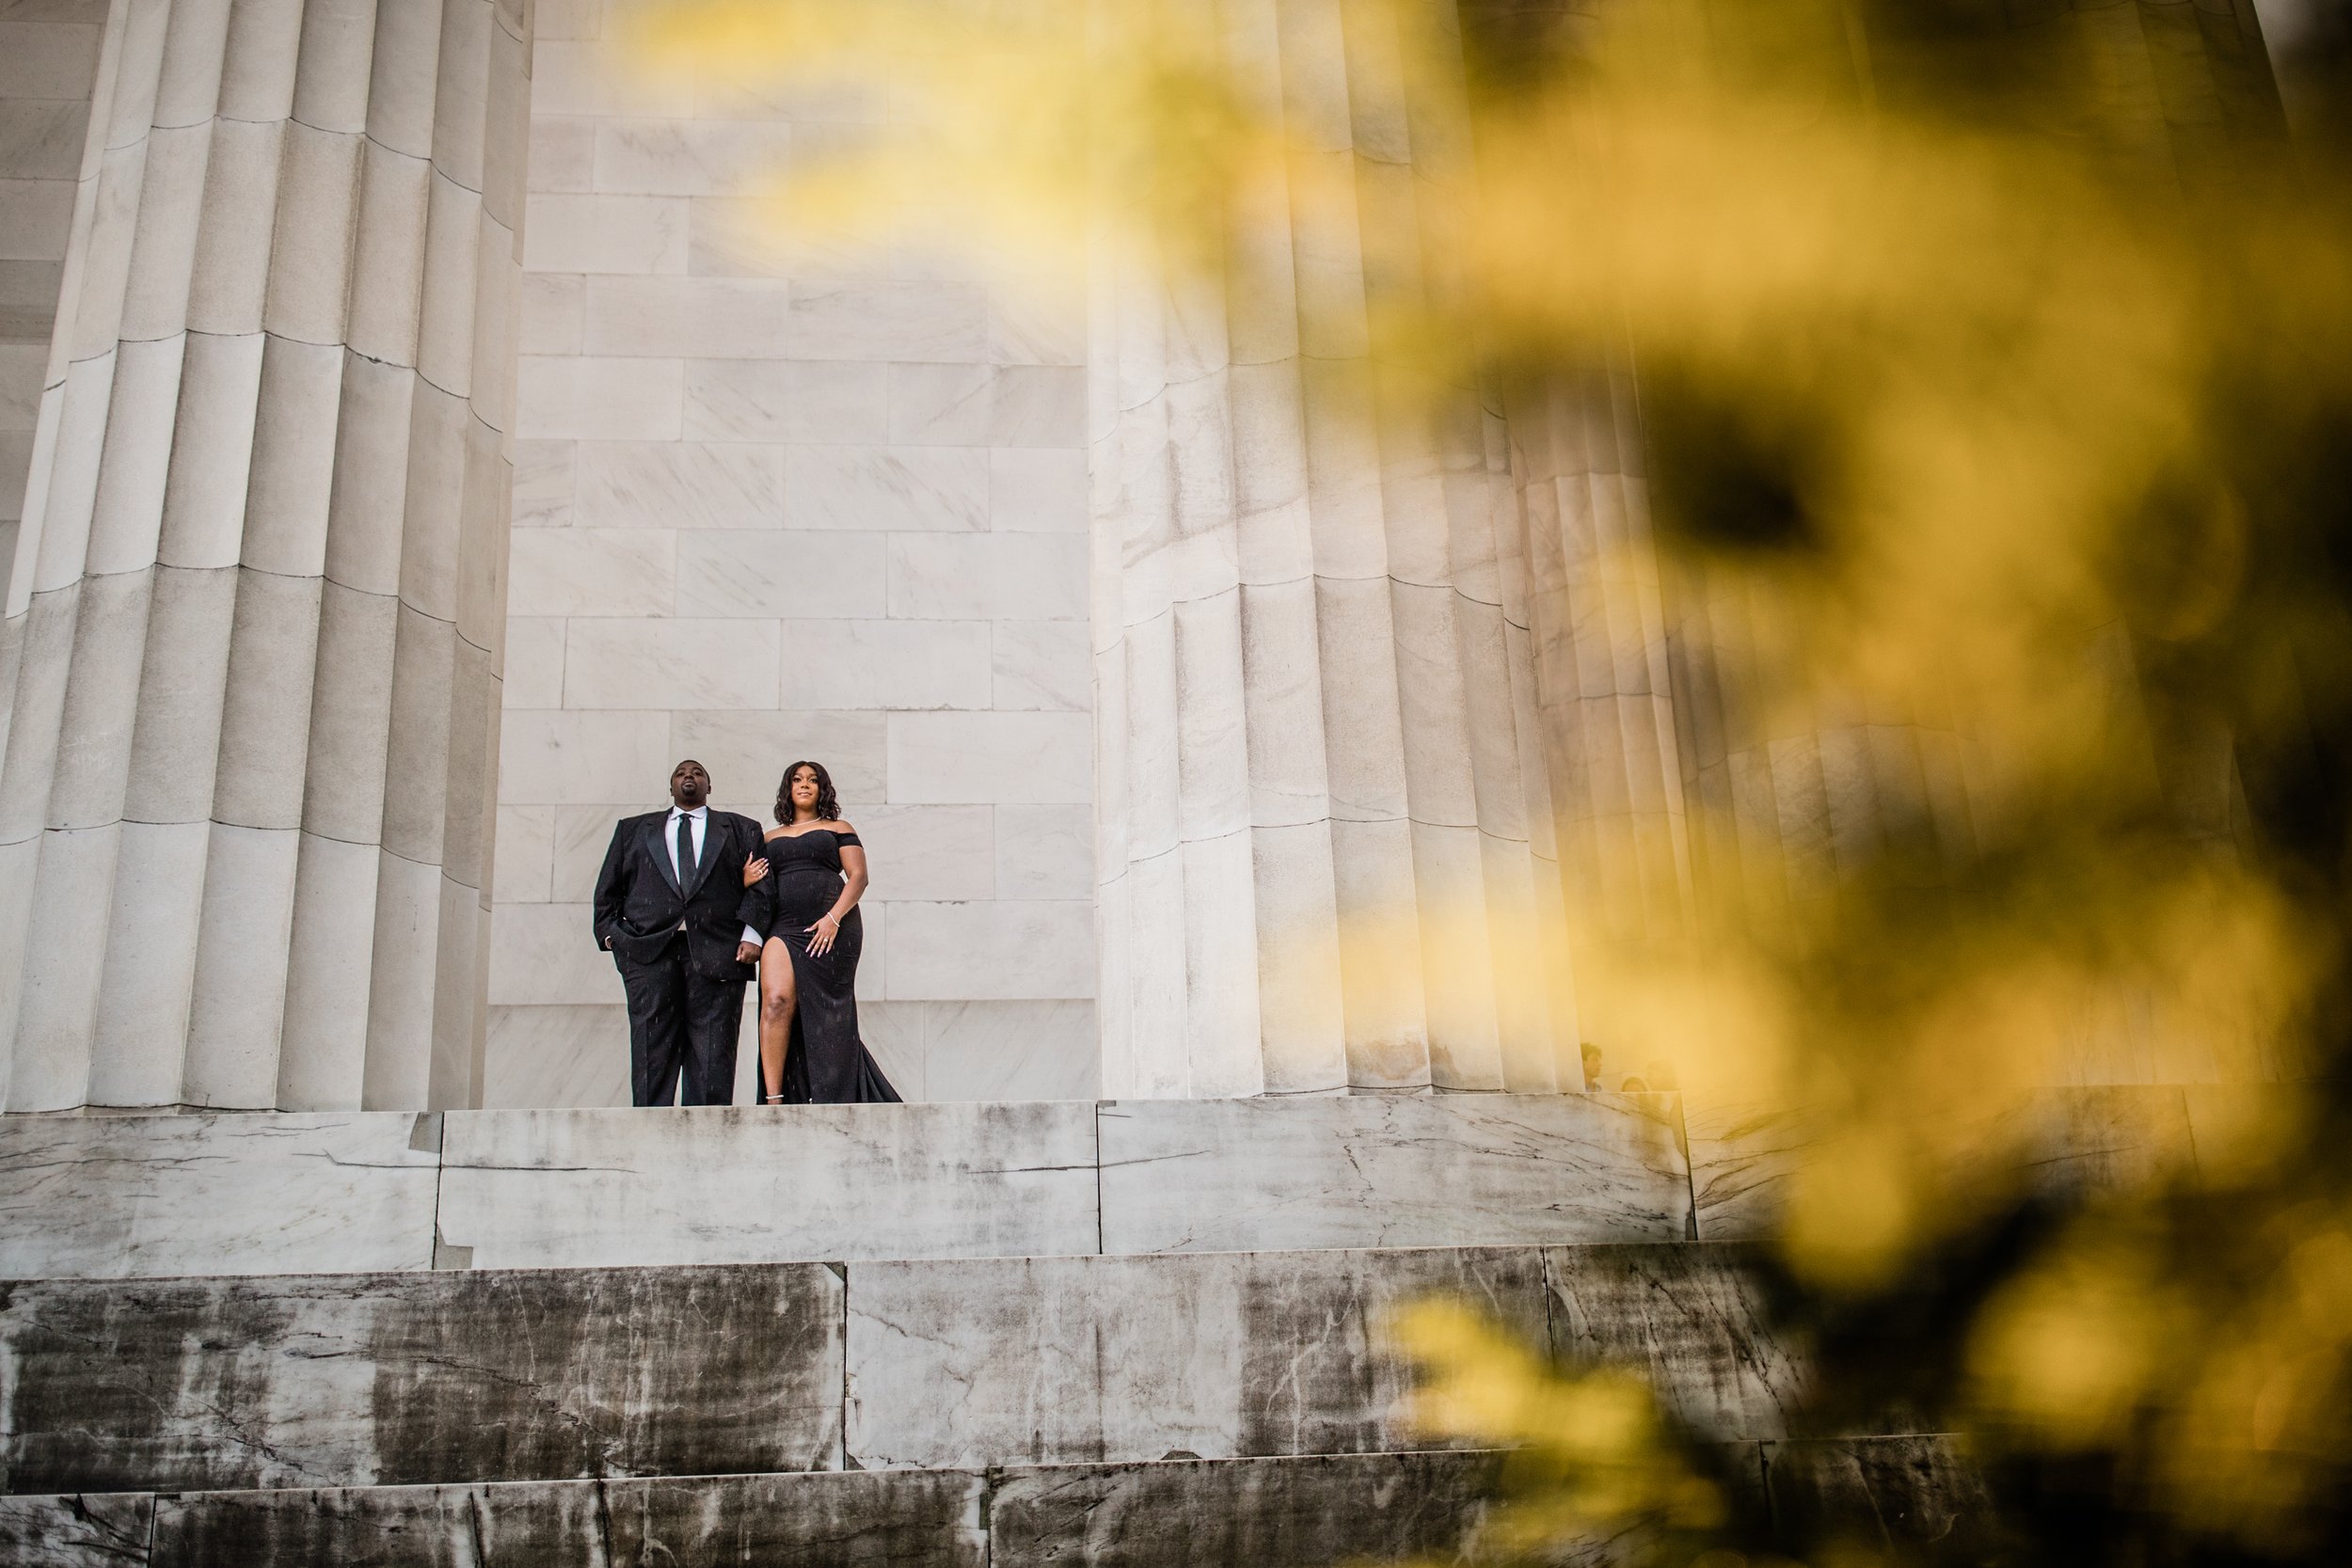 Best Black Wedding Photographers in Washington DC Megapixels Media Photography Engagement Photos at the Lincoln Memorial-8.jpg